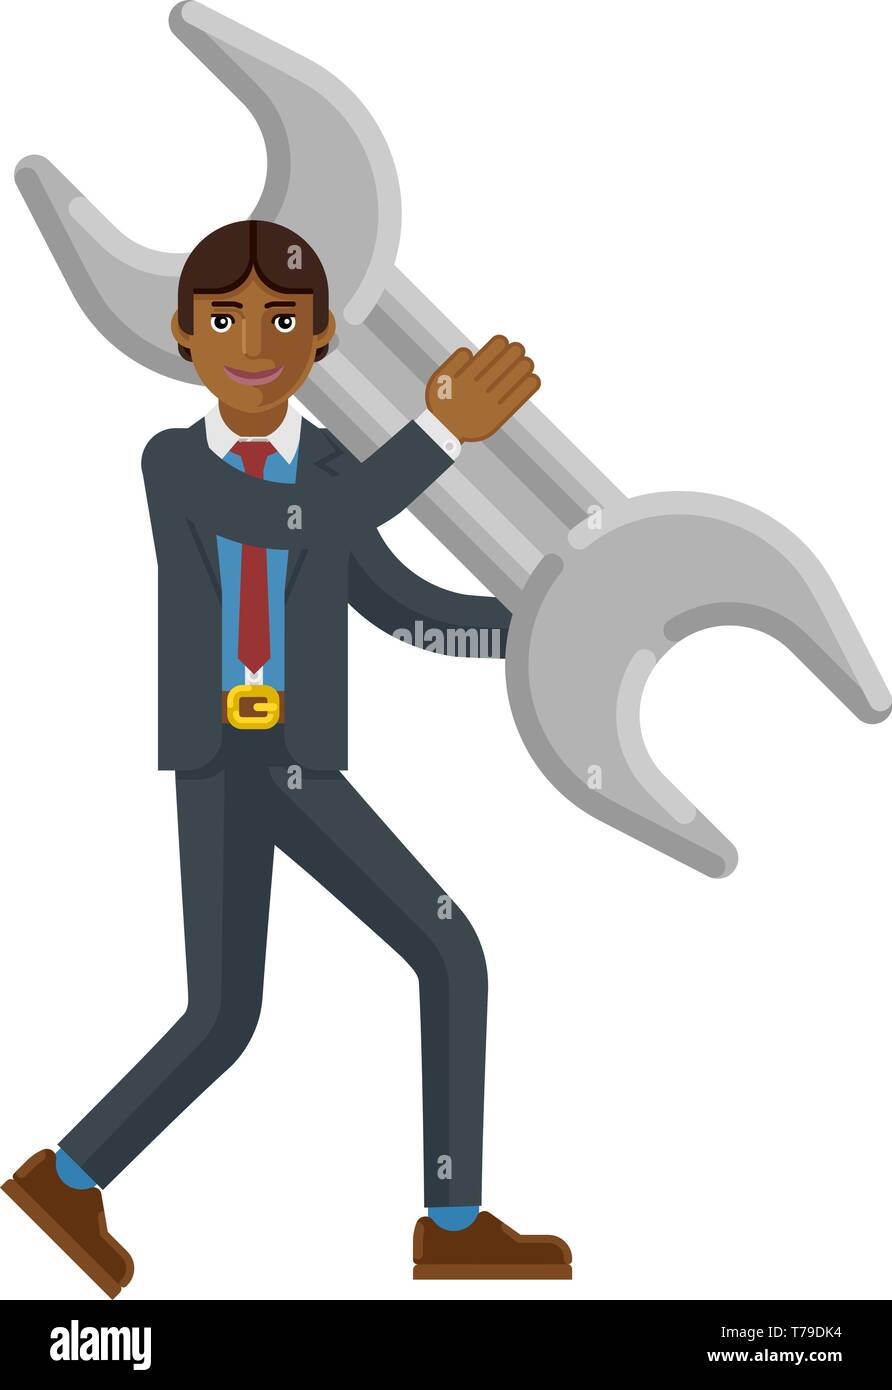 Asian Business Man Holding Spanner Wrench Concept Stock Vector